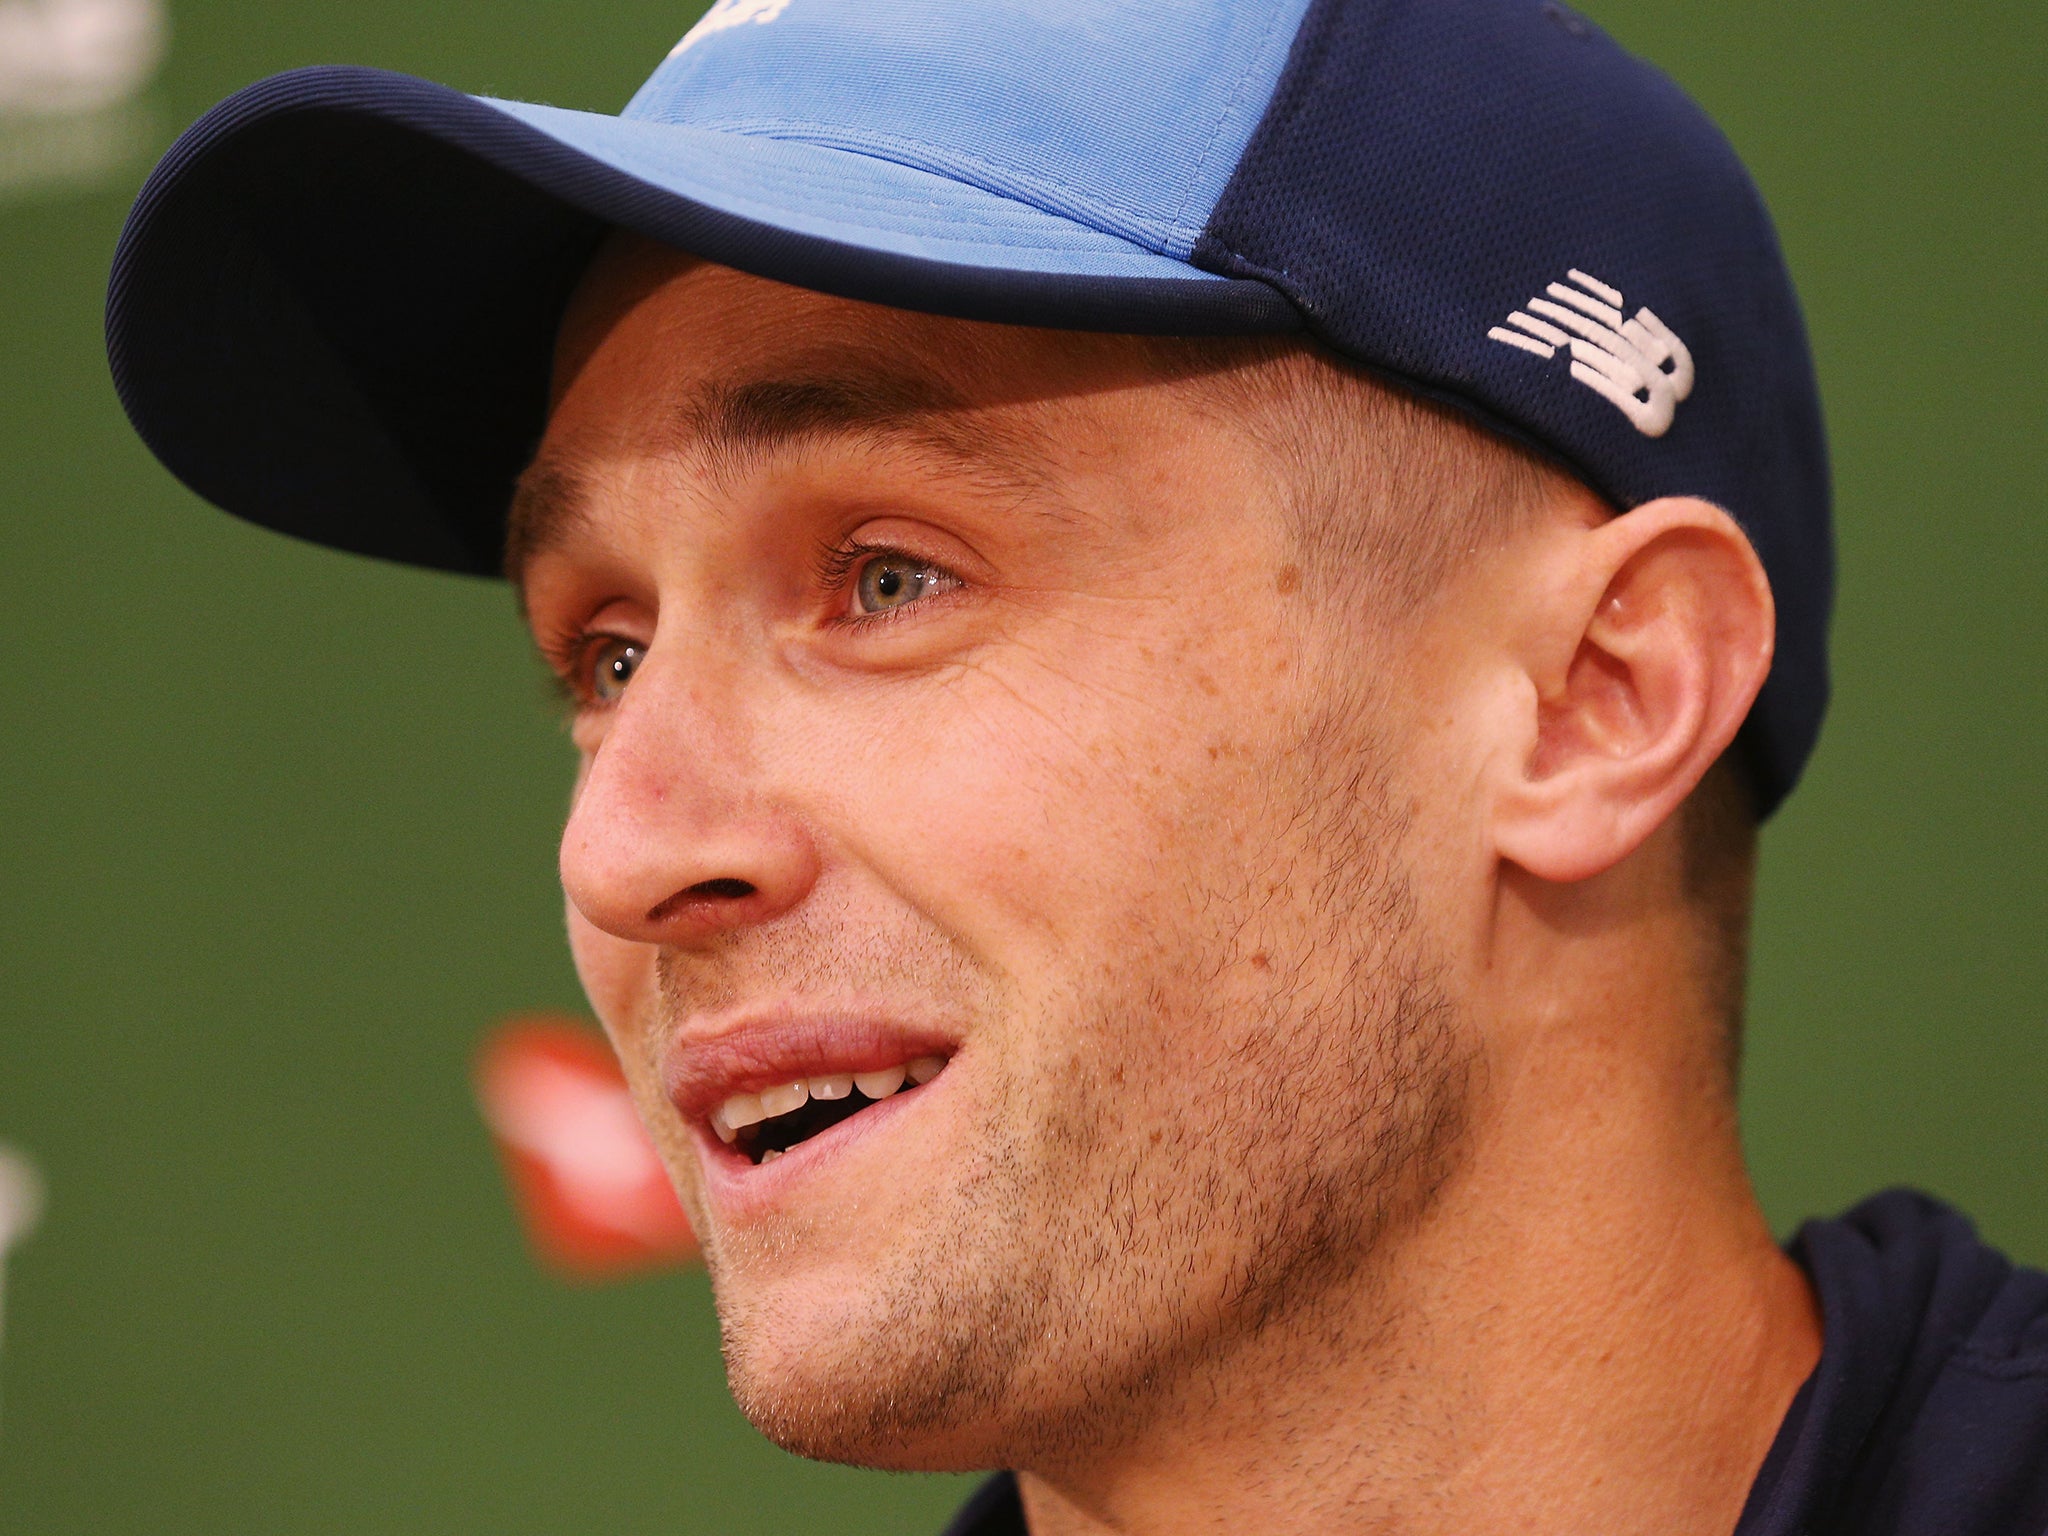 Woakes defended England captain Joe Root after a tough tour of Australia